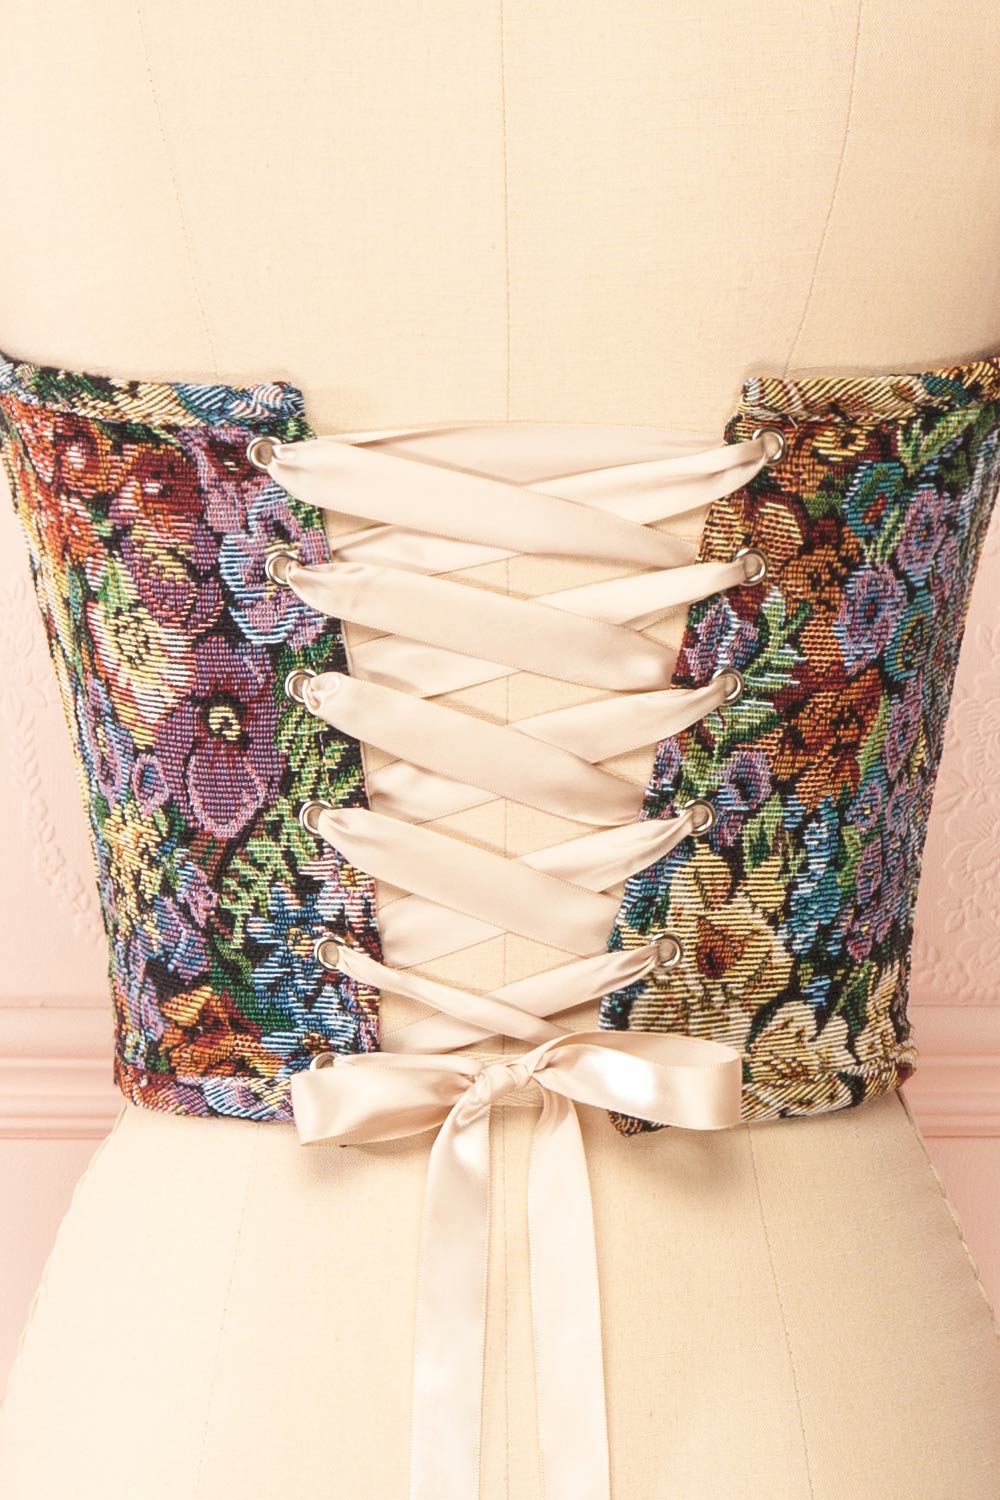 Brown Floral Lace-Up Strapless Boned Bustier Coset Top – Dreamdressy